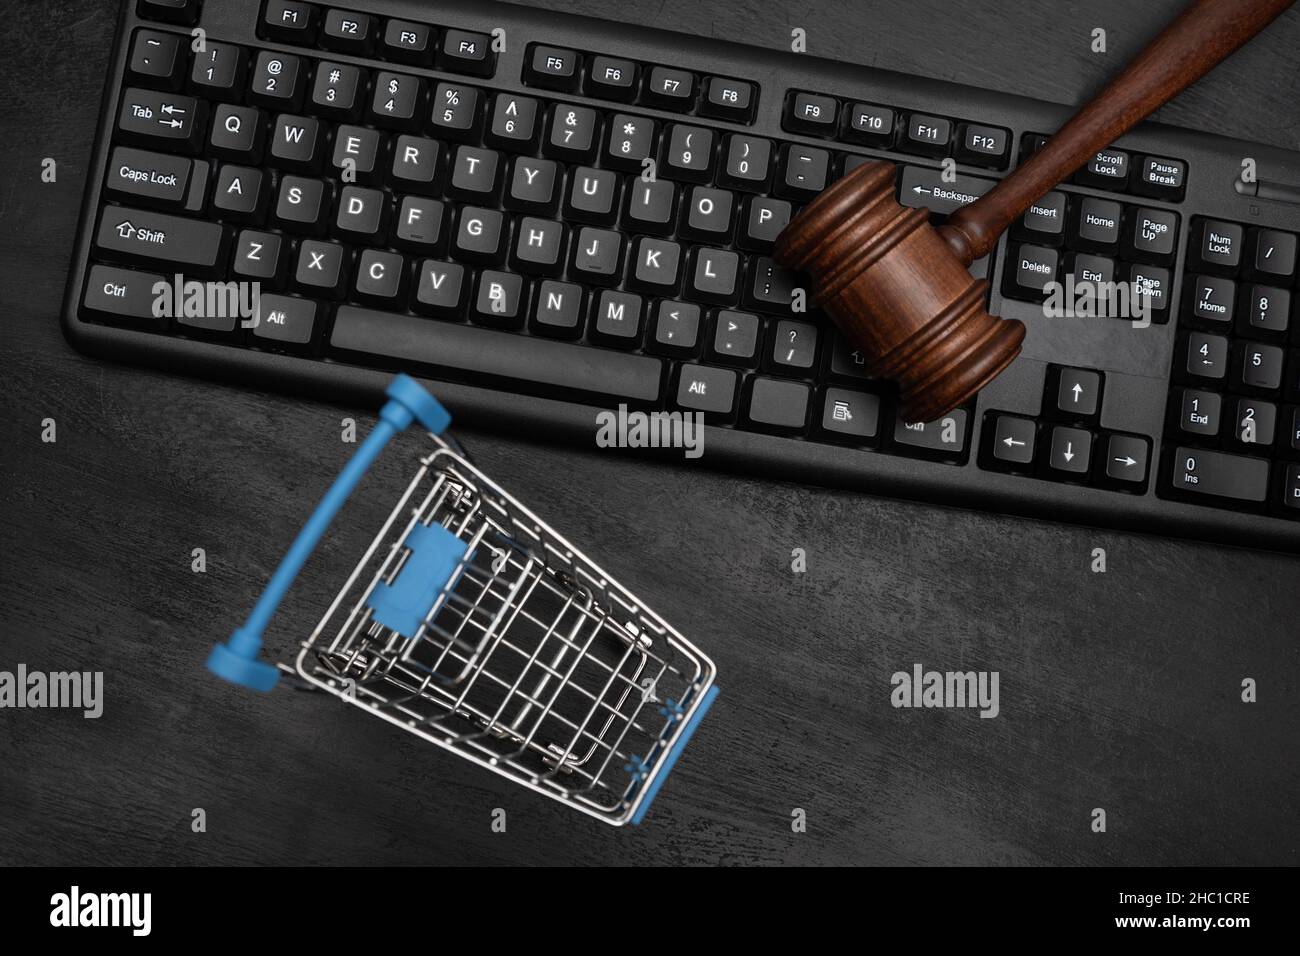 Empty shopping cart and judges hammer on the keyboard. Online Auction Stock Photo